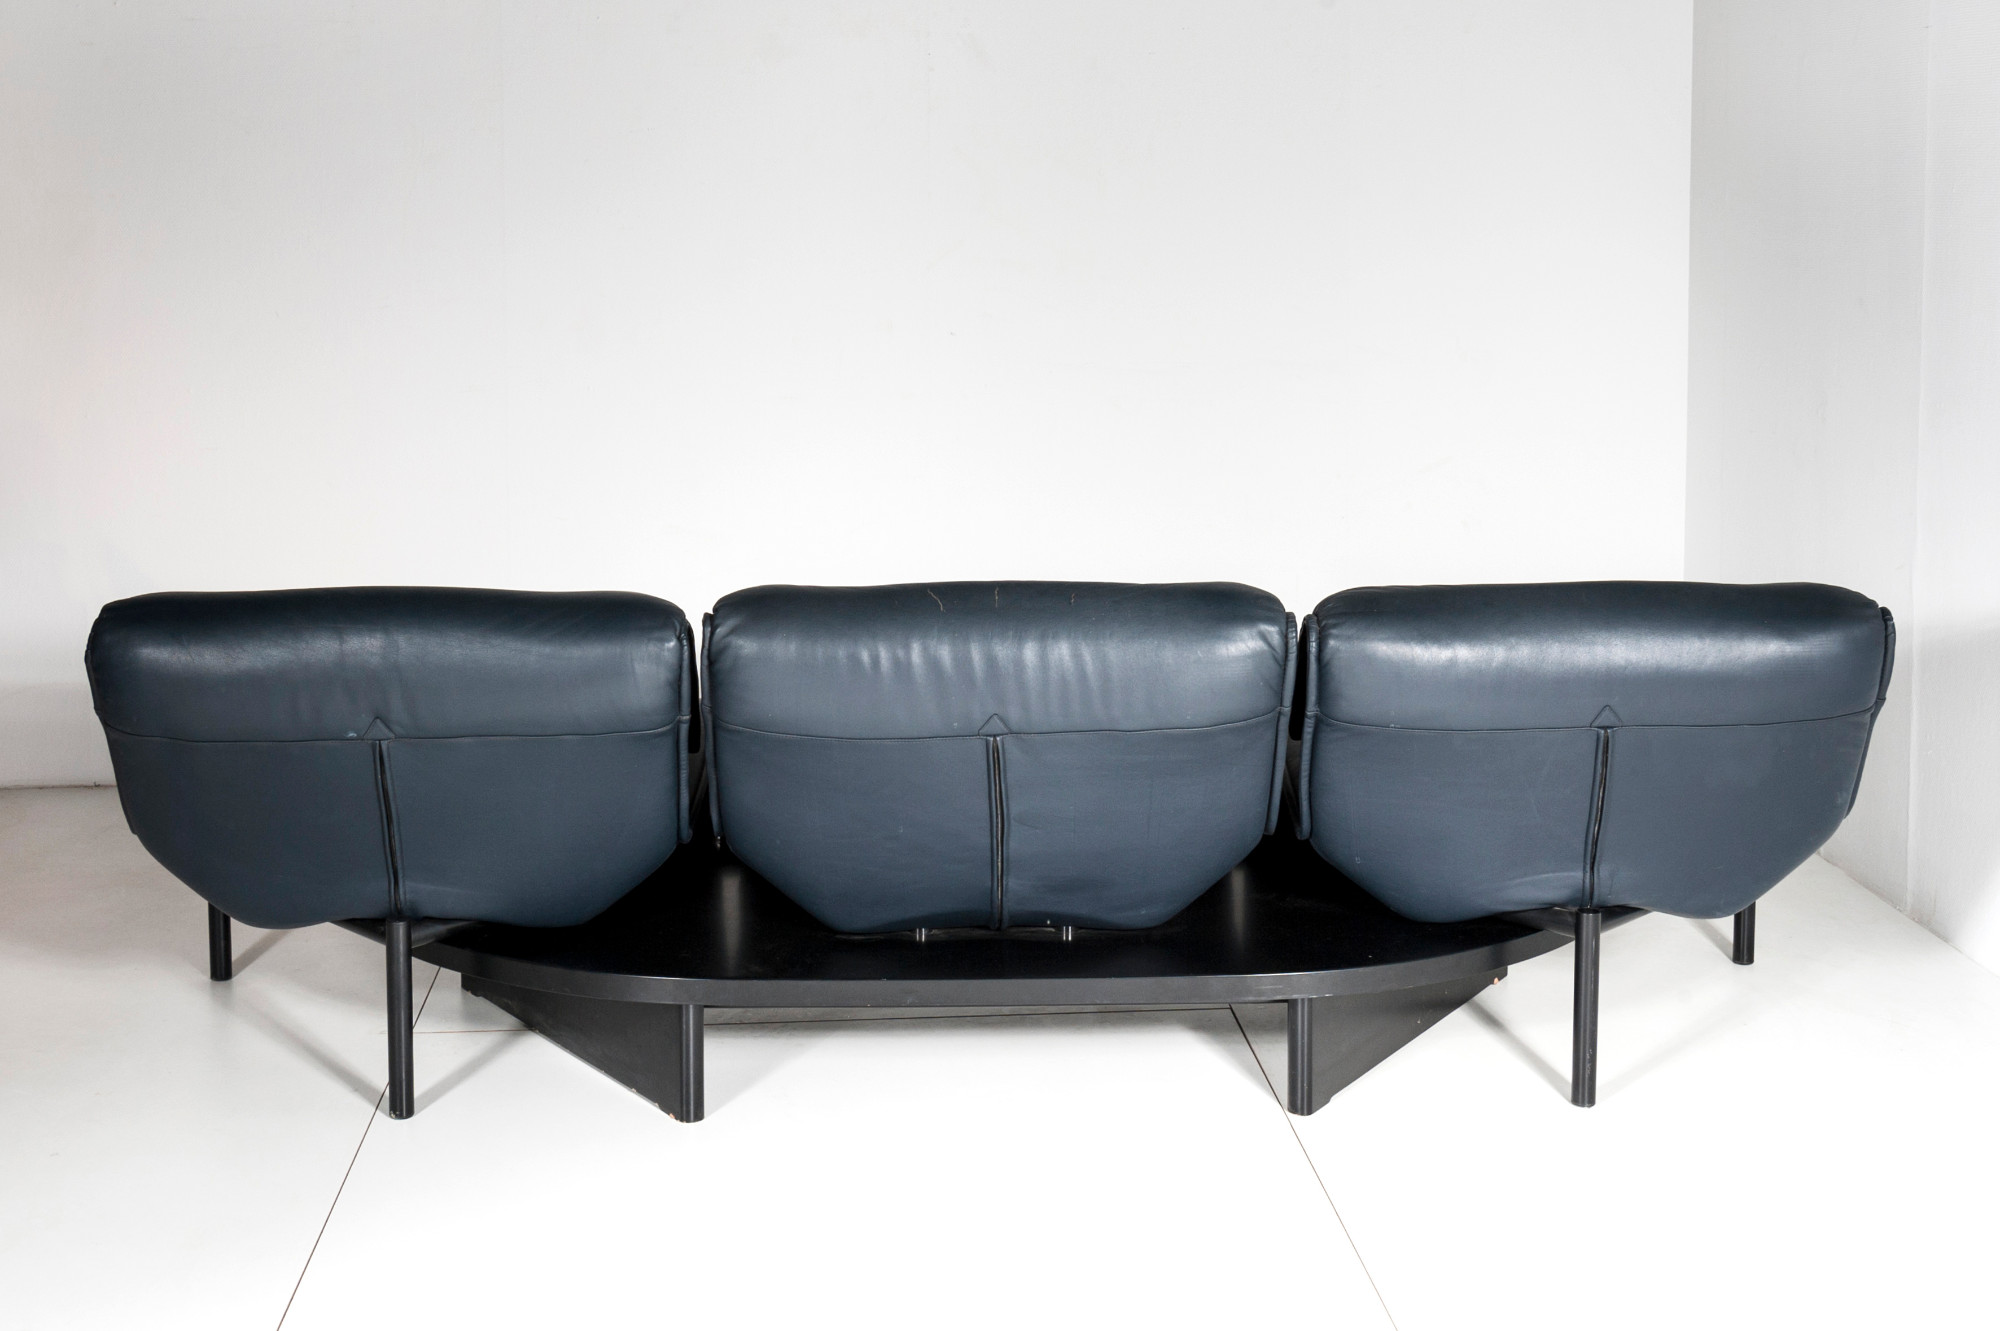 Sofa By Vico Magistretti for Cassina in Blue leather